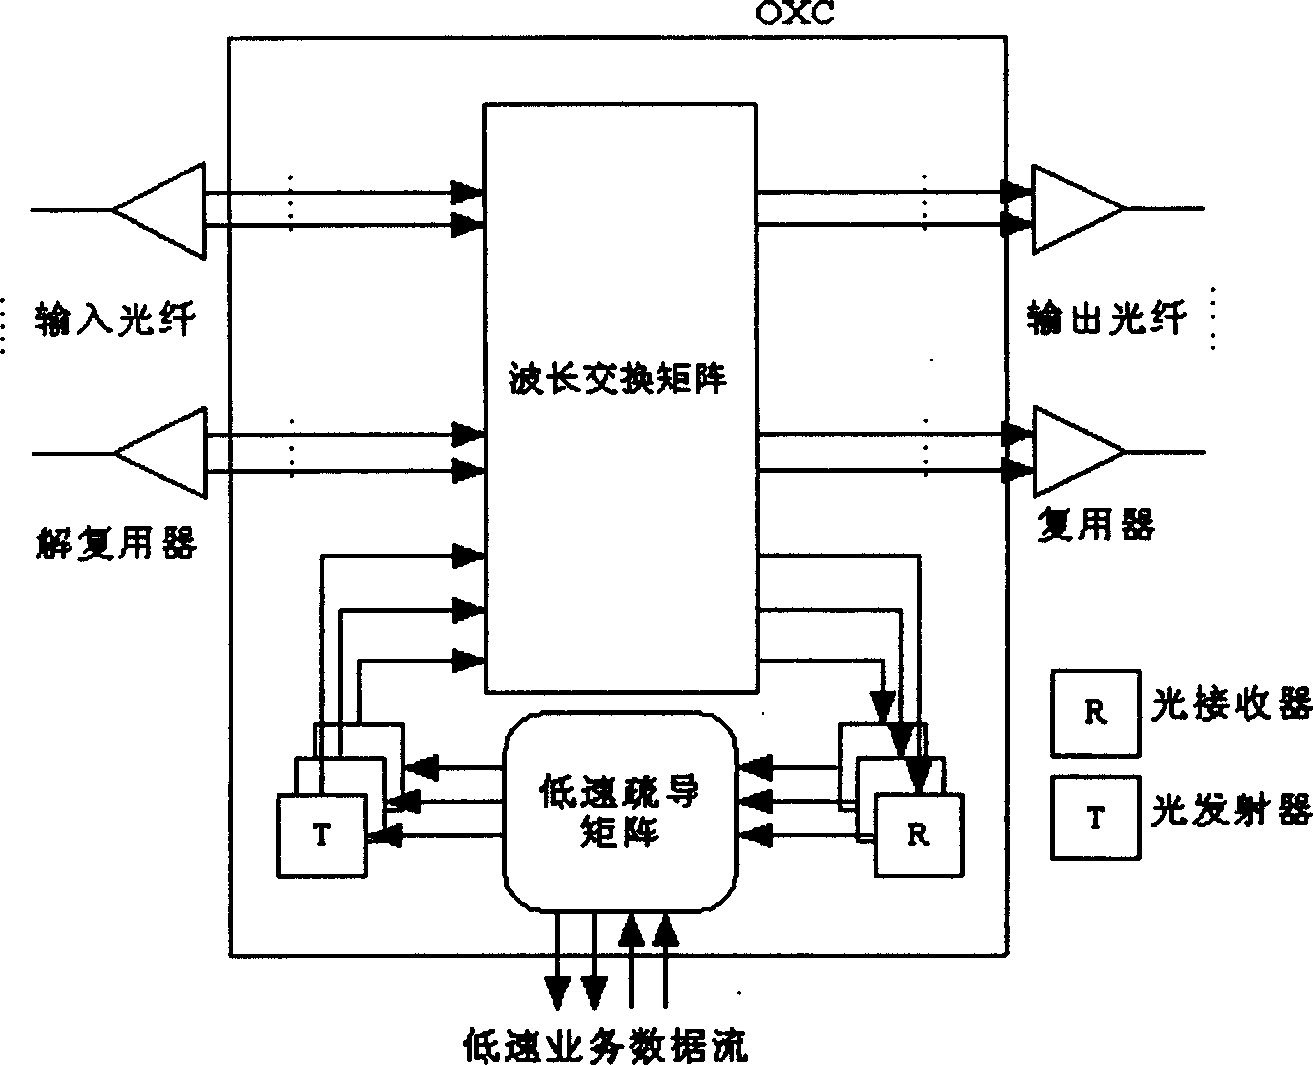 Integrated service leading method for WDM optical network